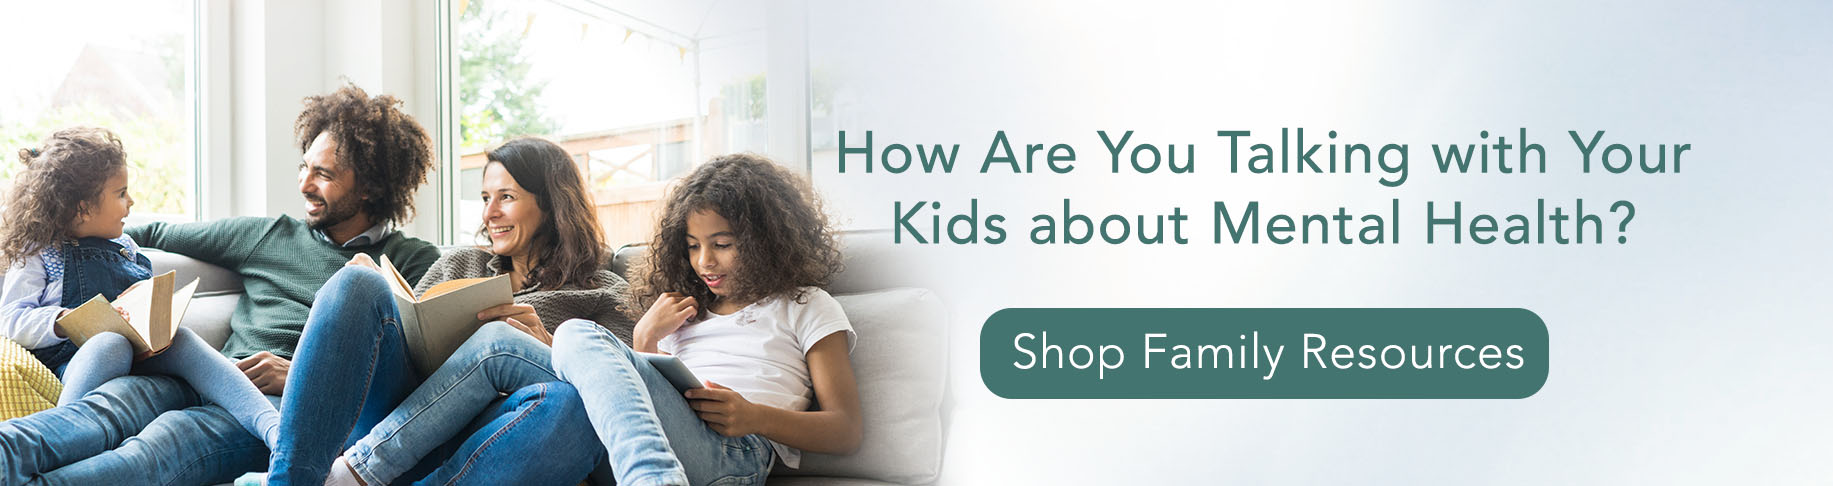 How Are You Talking with Your Kids about Mental Health? Shop Family Resources